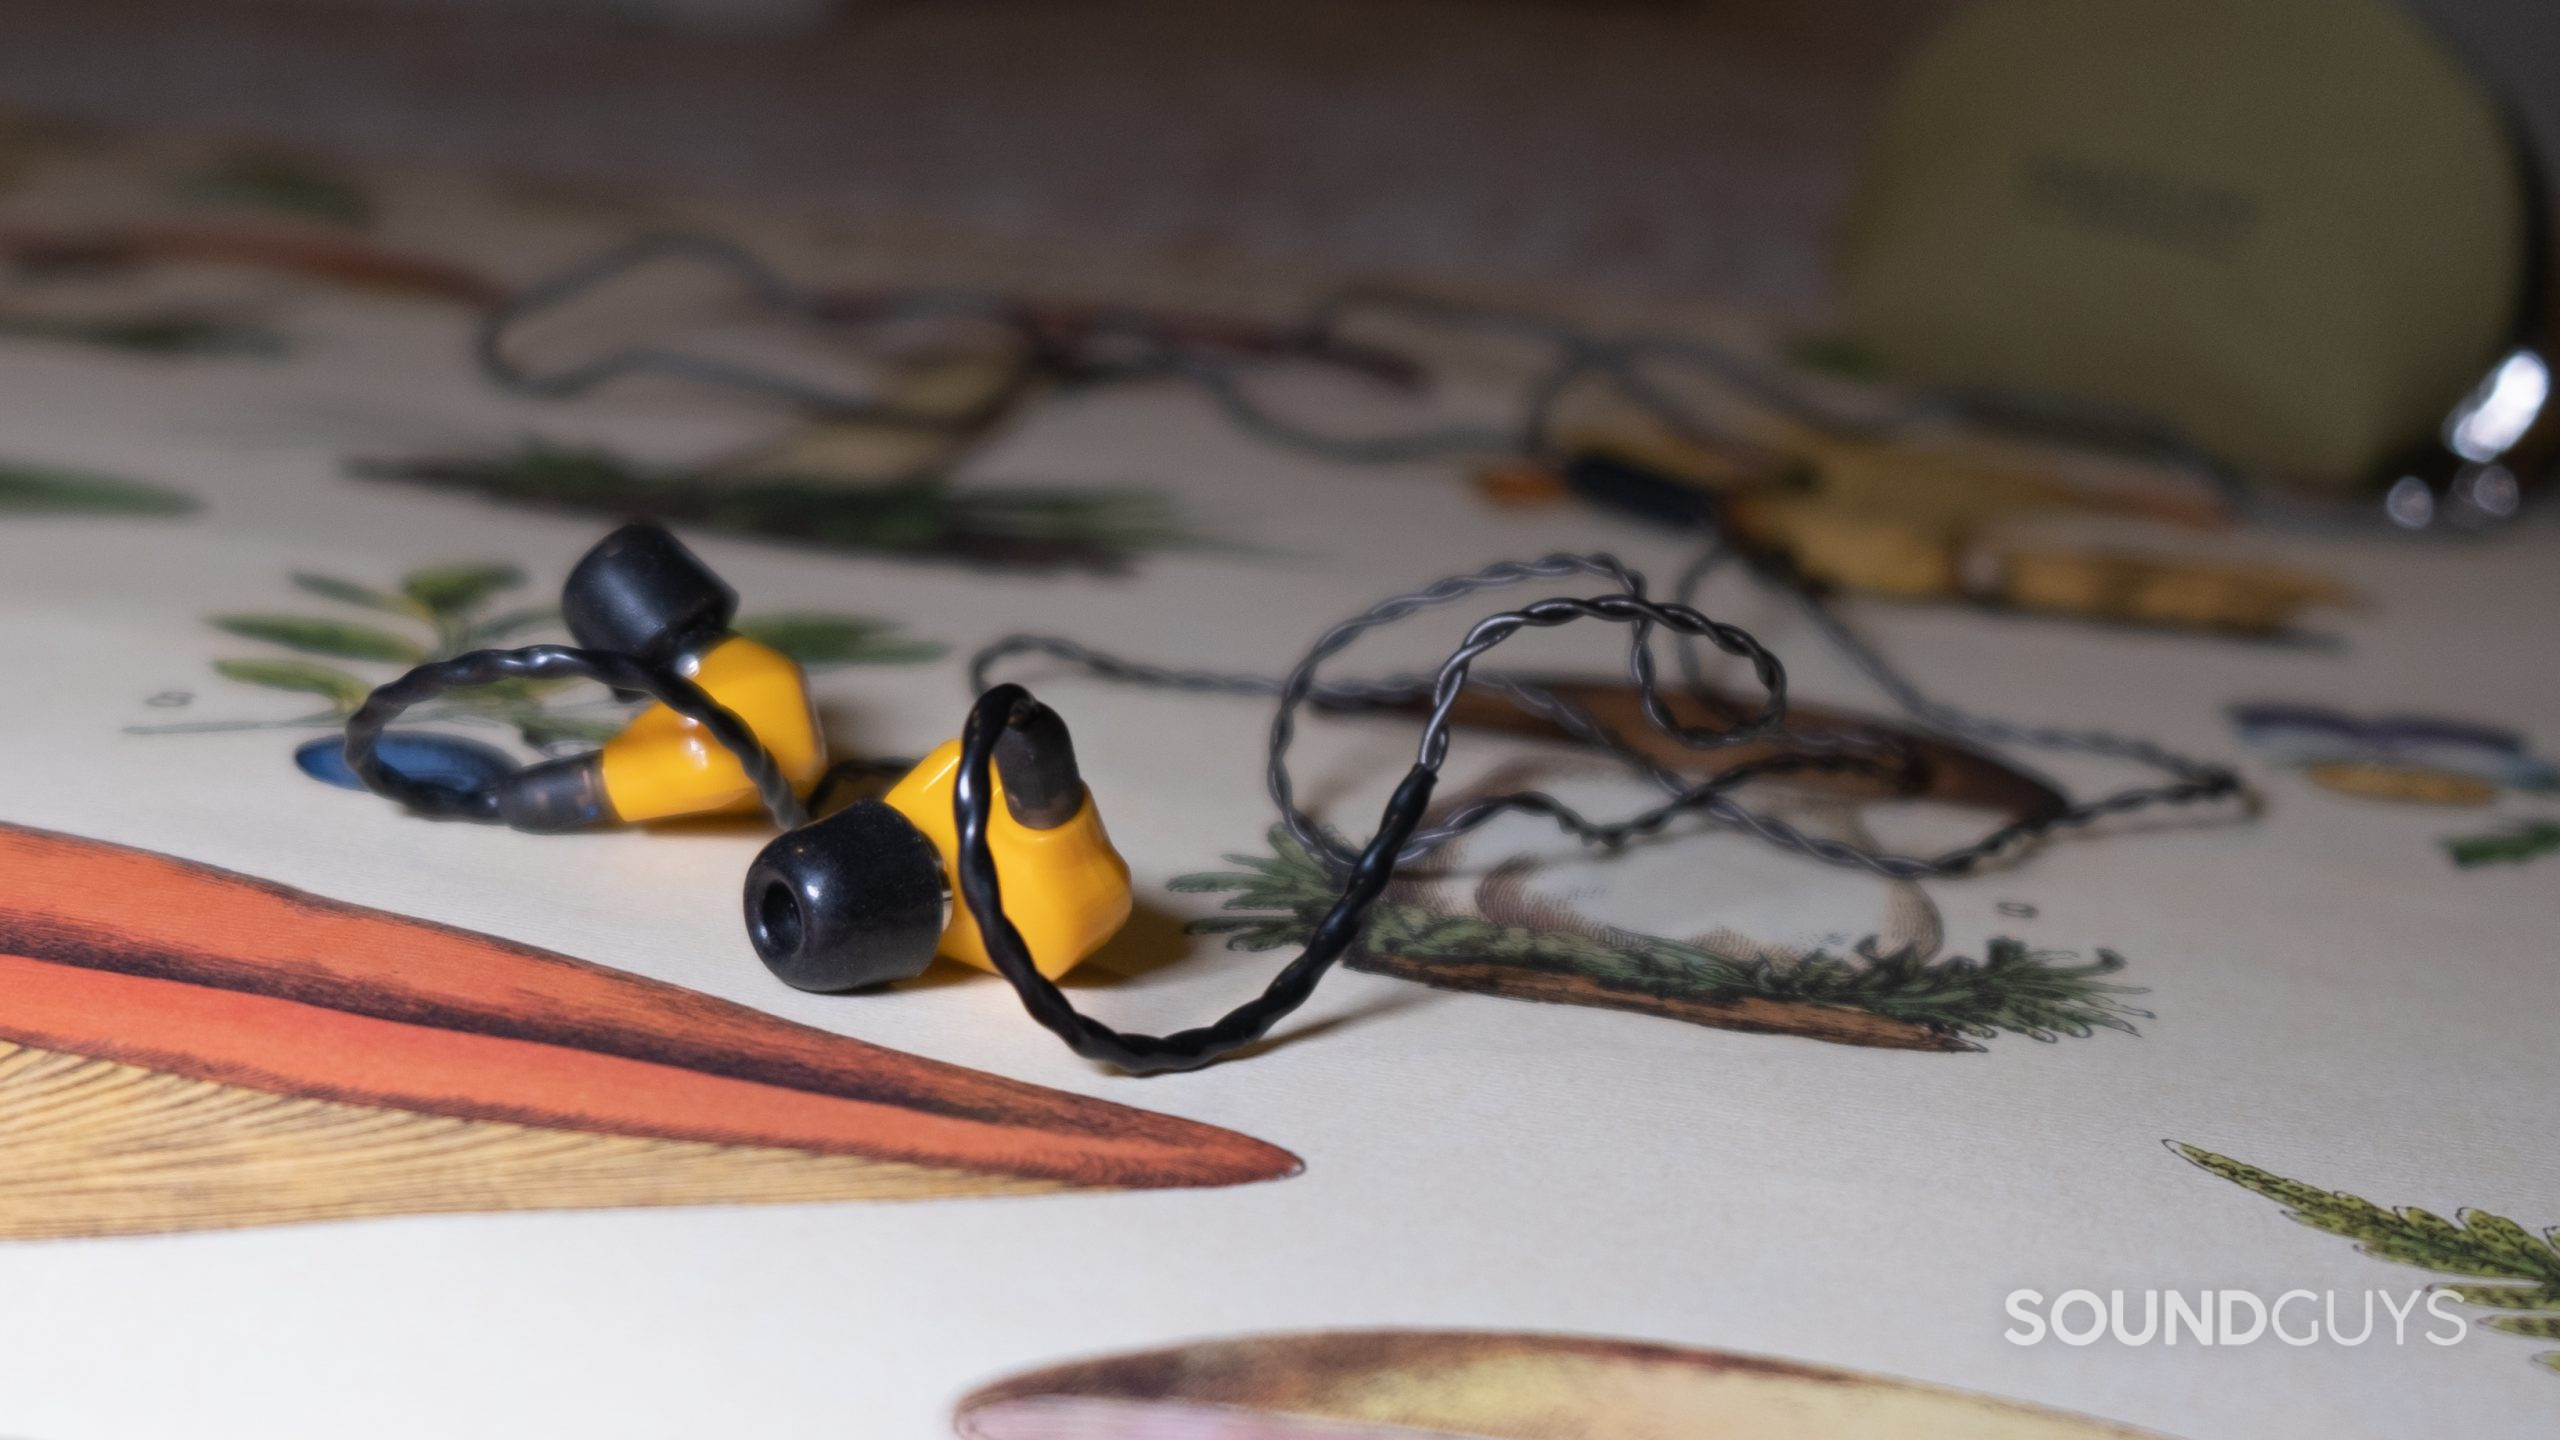 Image of Campfire Audio Honeydew earbuds with cables and case in the background.